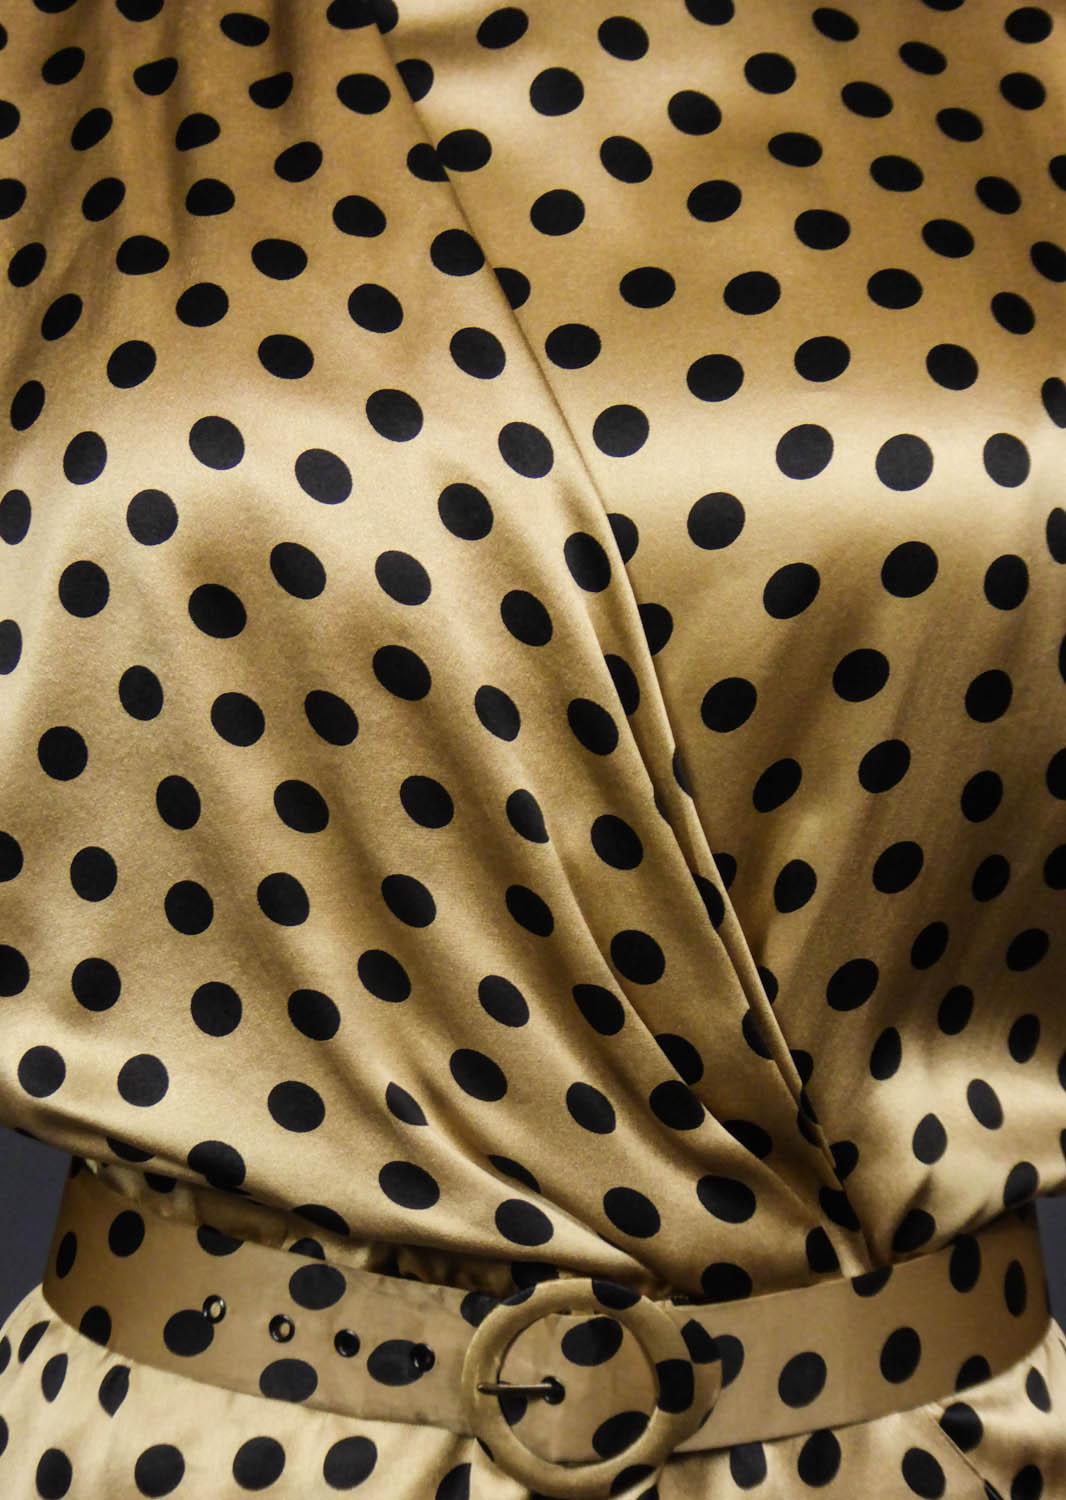 Circa 1985
France

Jean-Louis Scherrer blouse or top in champagne silk satin with black dots. Long sleeves with zip at the wrists and epaulettes. Crew neck collar with shawl draped effect and crossed from the shoulder. Size tightened by an elastic